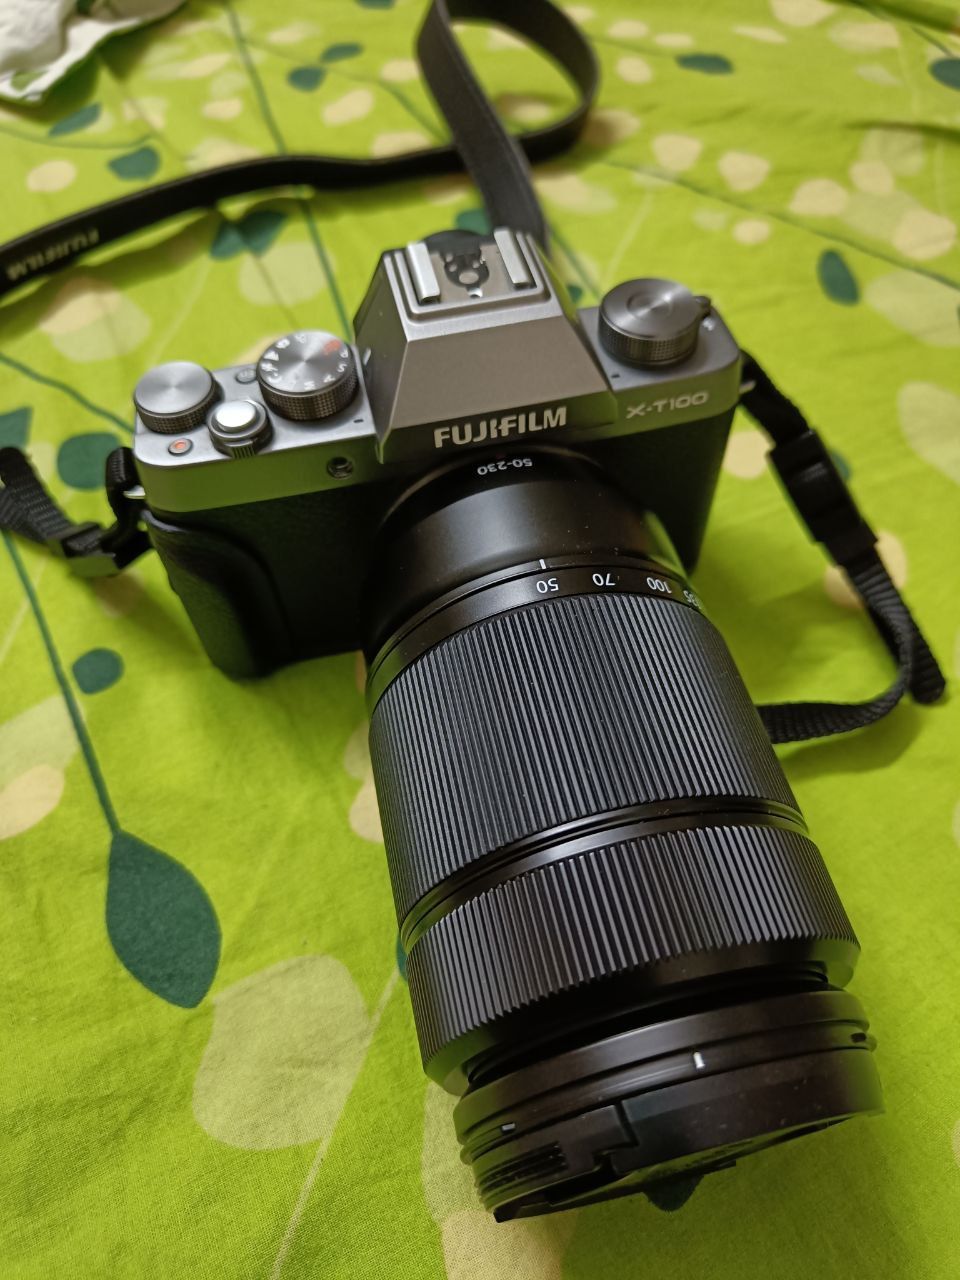 Fuji X-T100 with 50-230mm lens